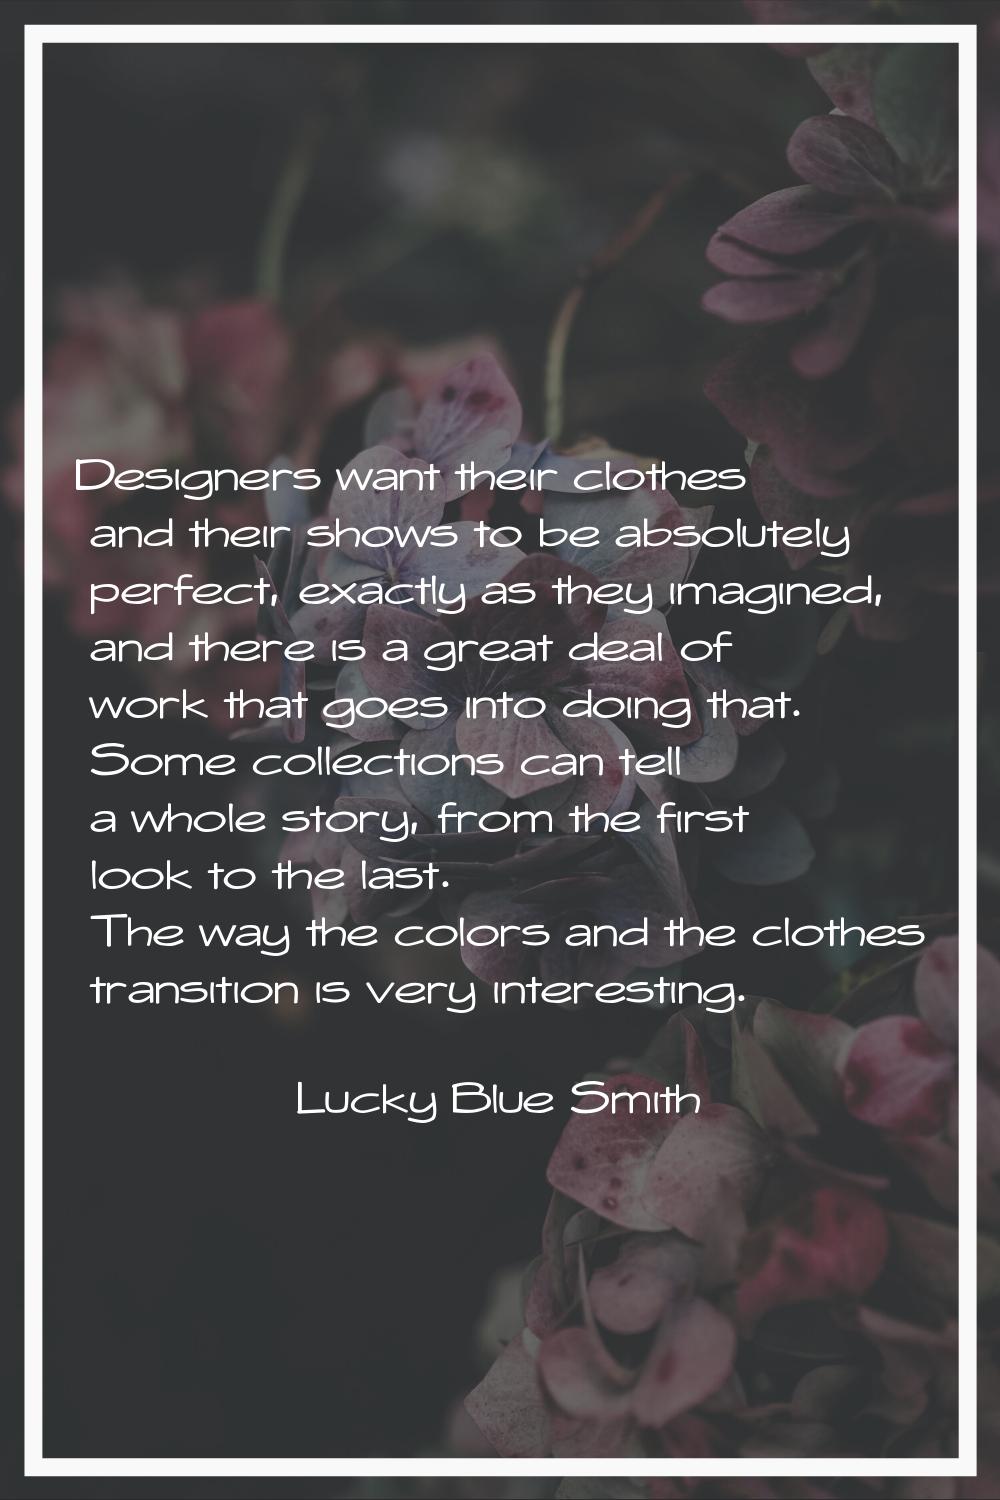 Designers want their clothes and their shows to be absolutely perfect, exactly as they imagined, an